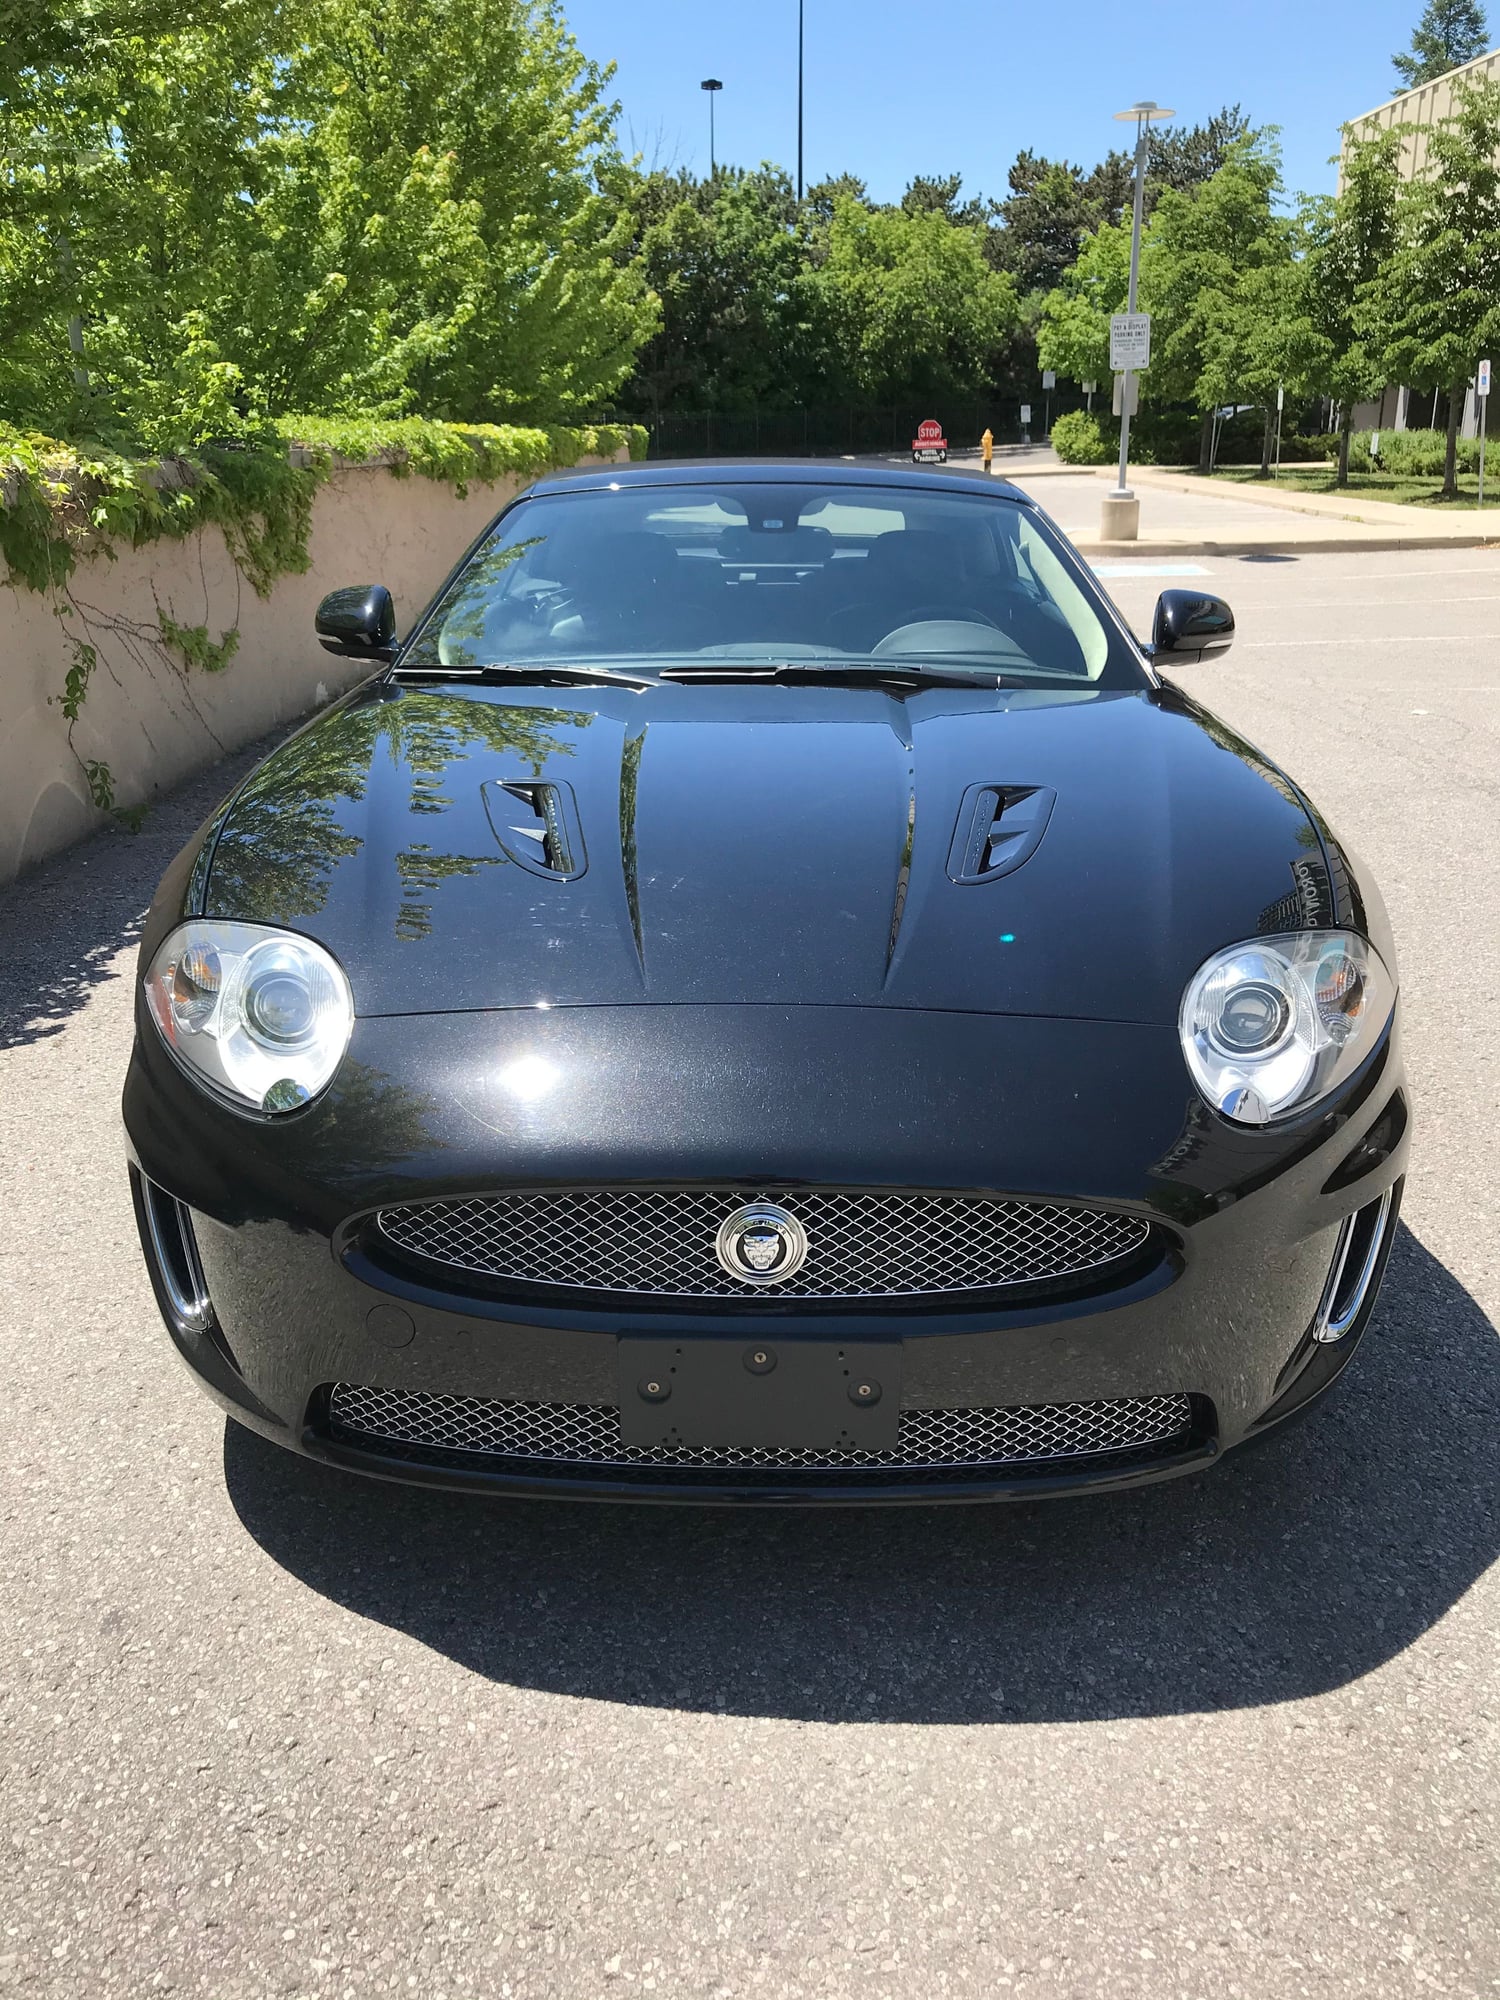 2011 Jaguar XKR - 2011 XKR Convertible - Used - VIN SAJXA4EC1BMB44632 - 18,000 Miles - 8 cyl - 2WD - Automatic - Convertible - Black - Toronto, ON M6A1N8, Canada